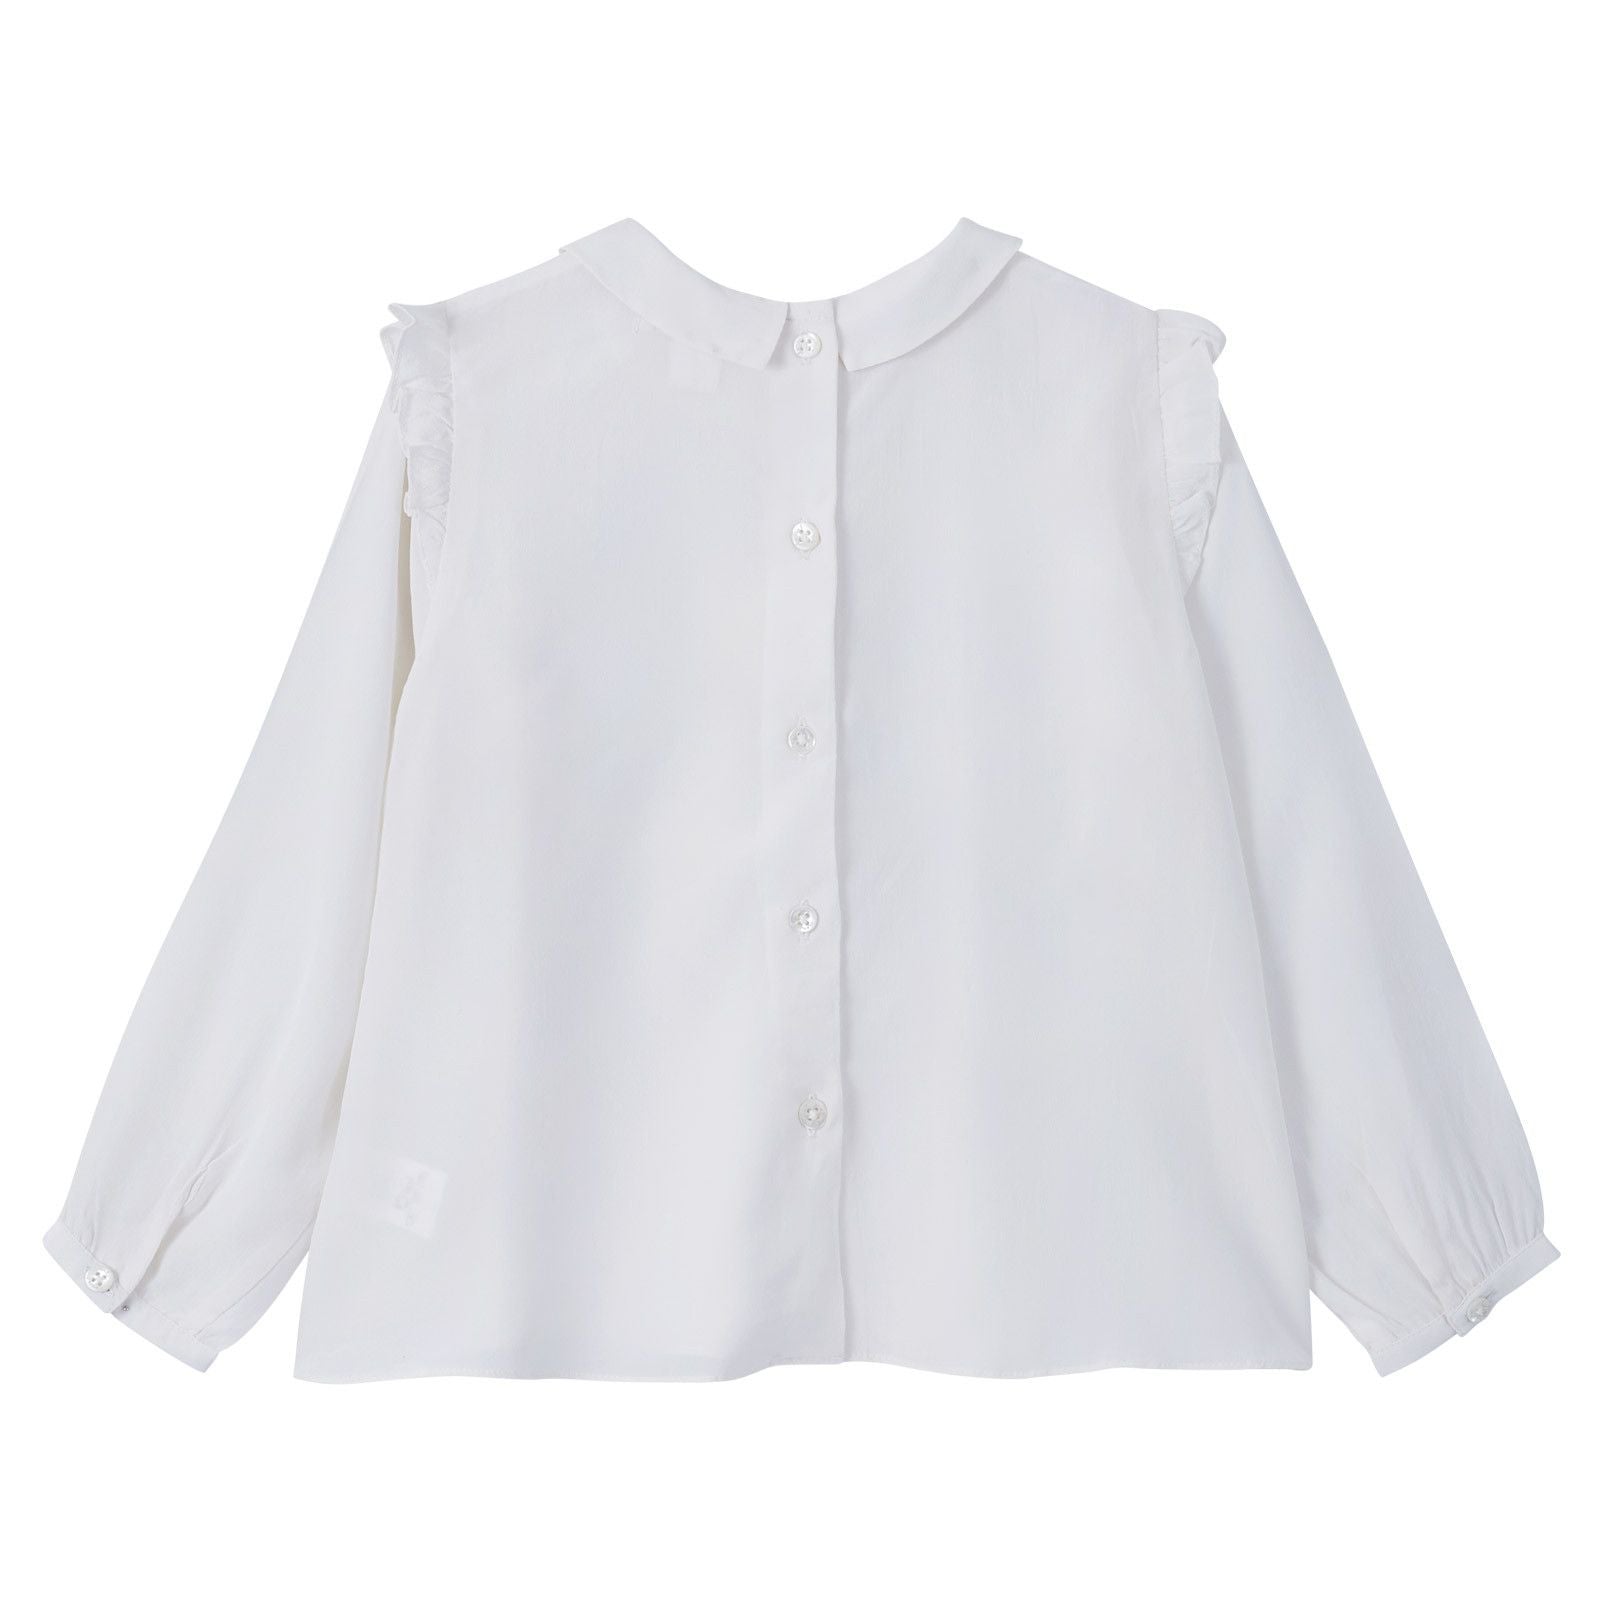 Girls Ivory Silk Blouse With Frilly Shoulder - CÉMAROSE | Children's Fashion Store - 2